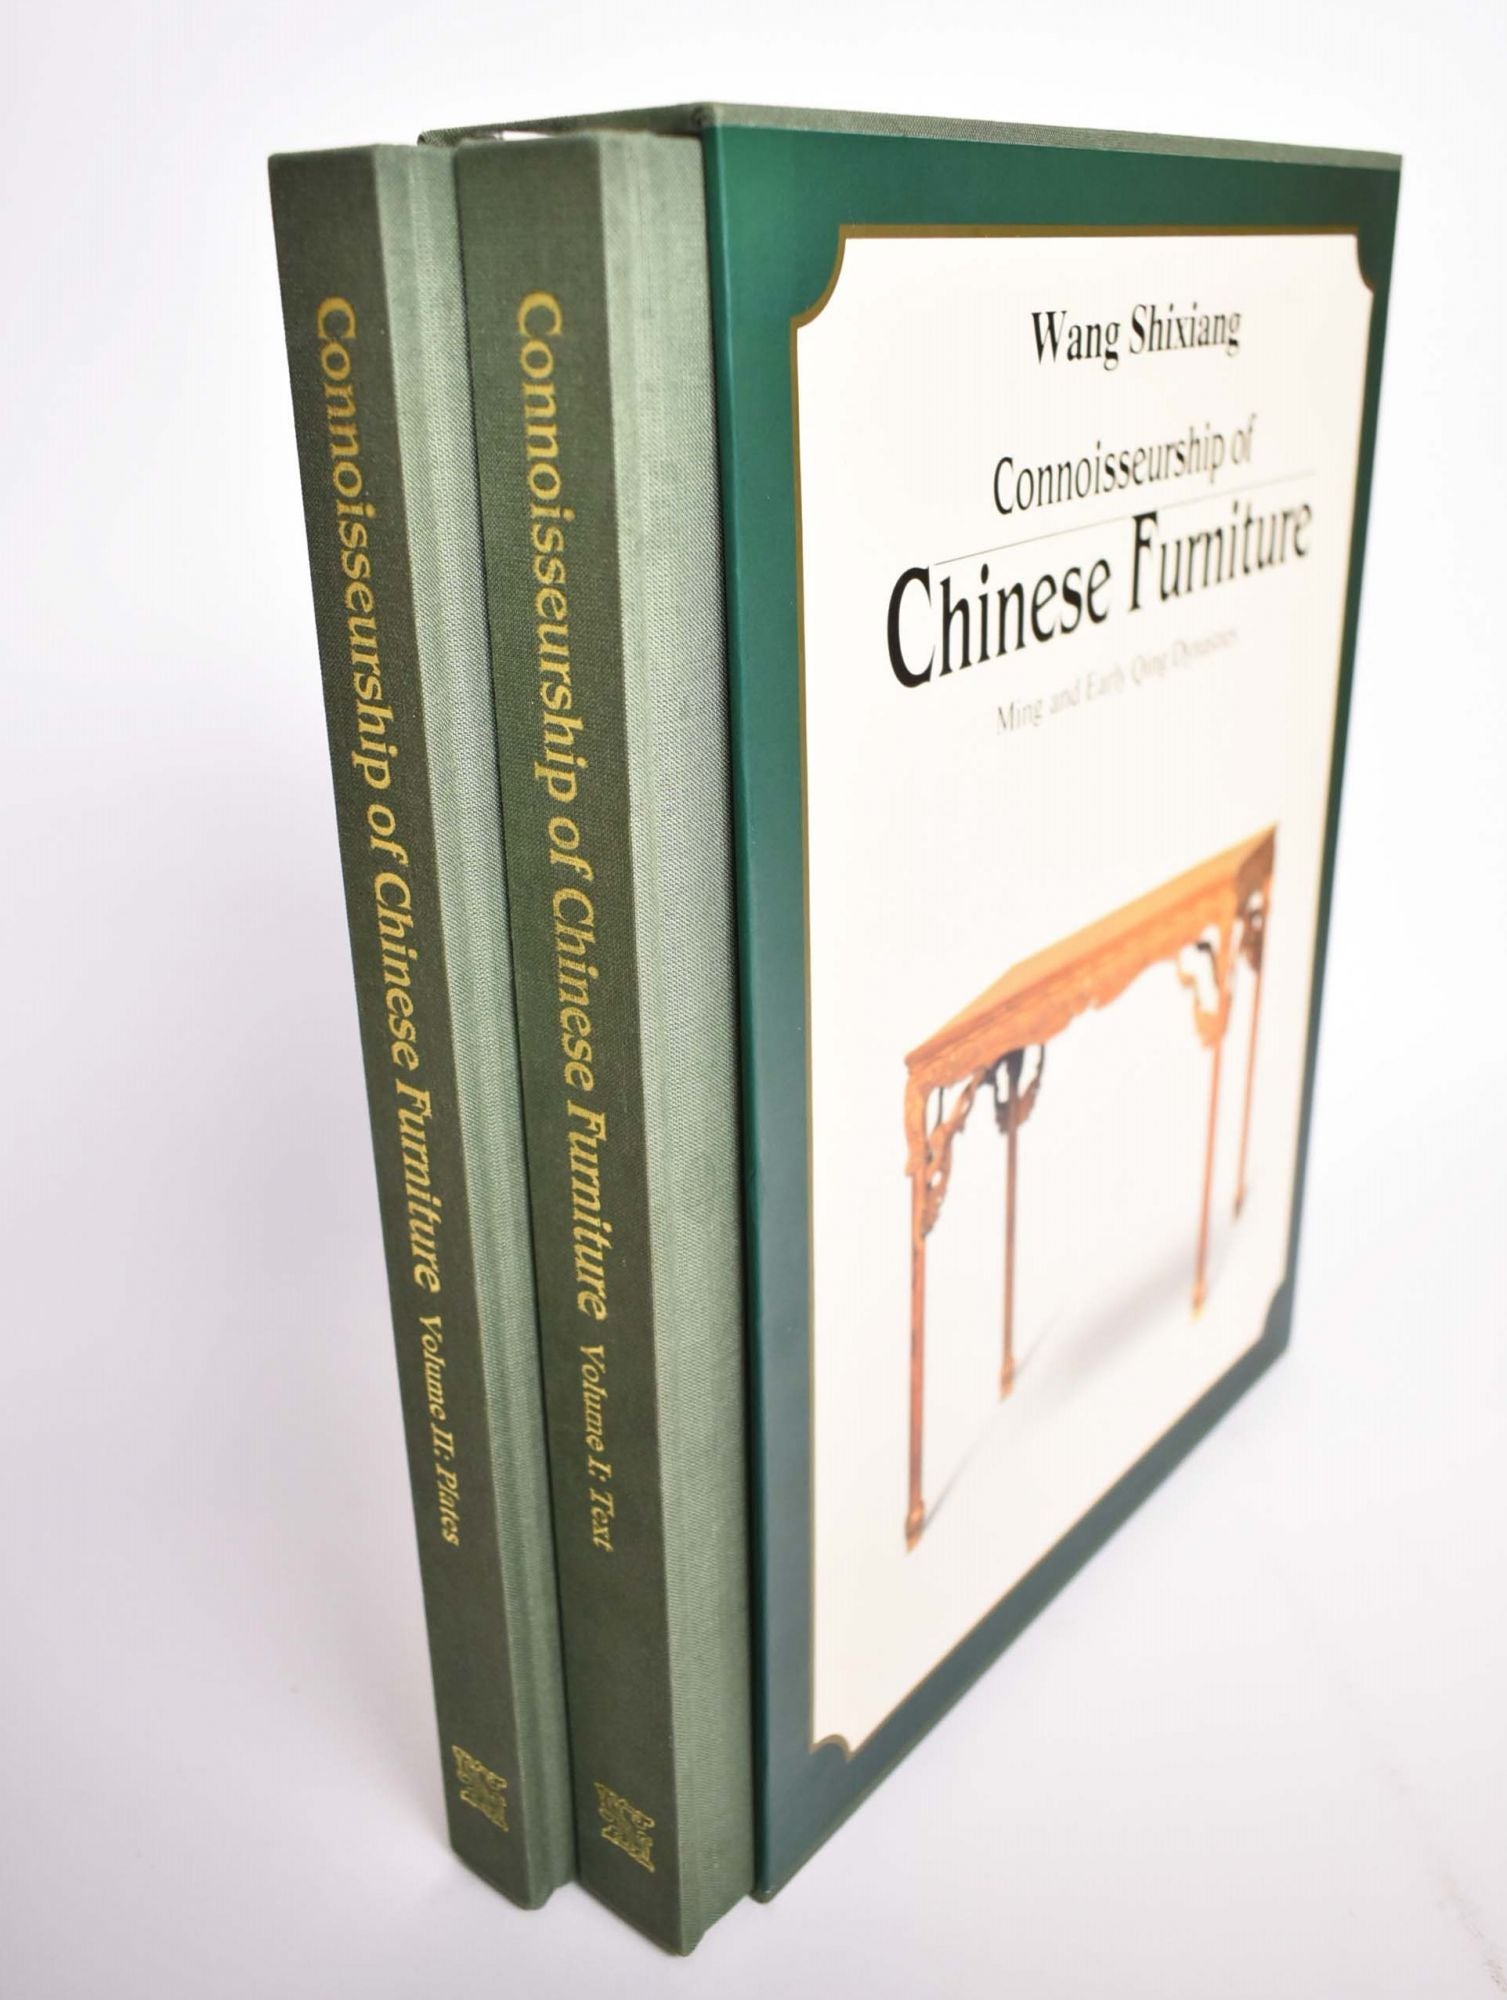 Connoisseurship of Chinese Furniture: Ming and Early Qing 